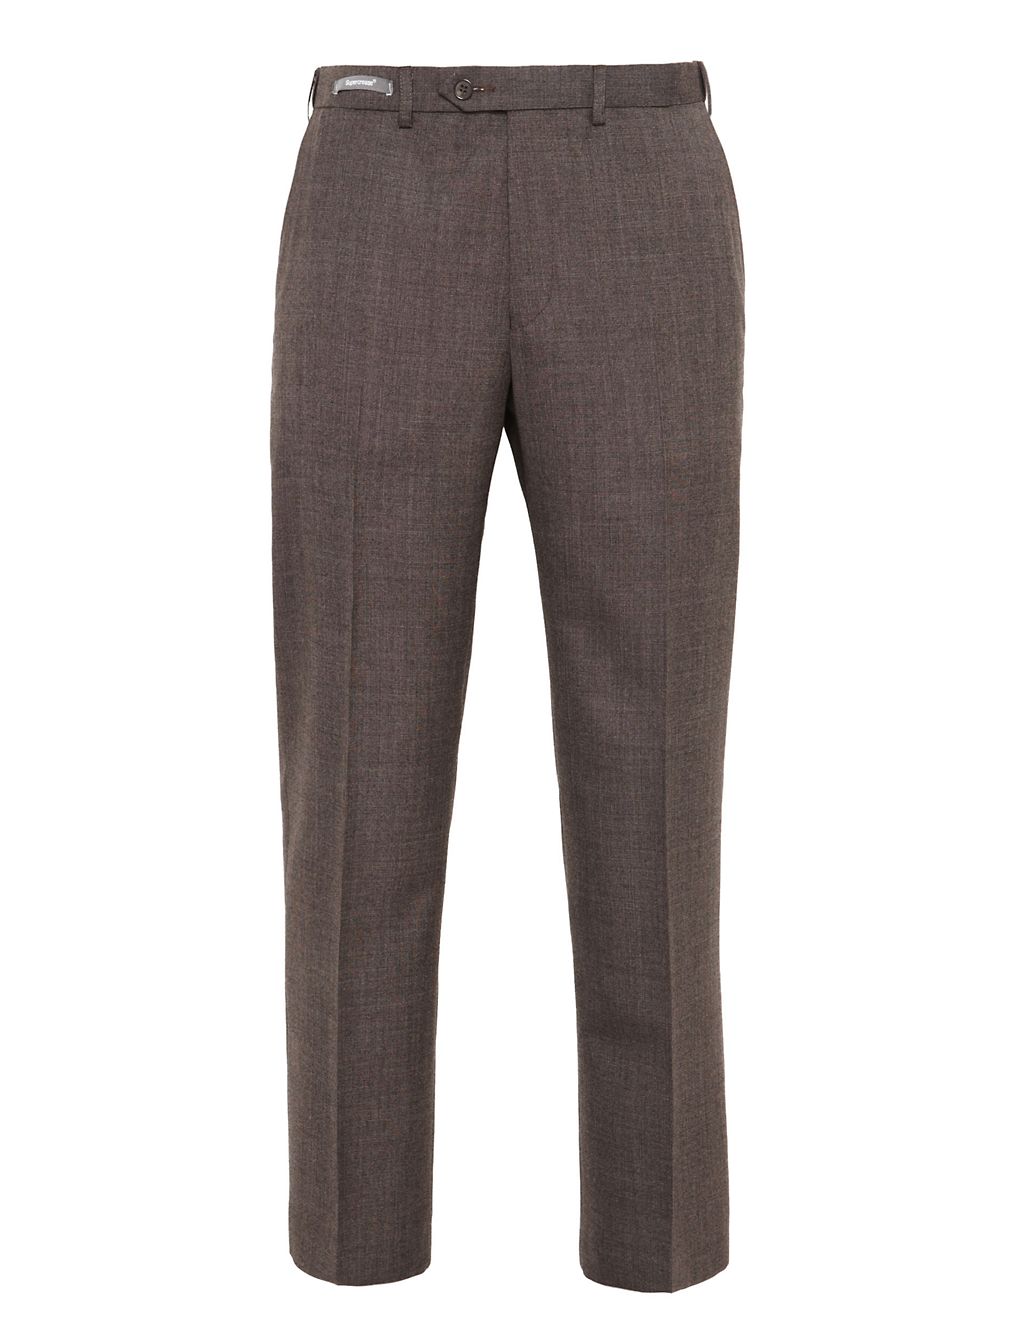 Supercrease® Active Waistband Flat Front Trousers with Wool 2 of 6